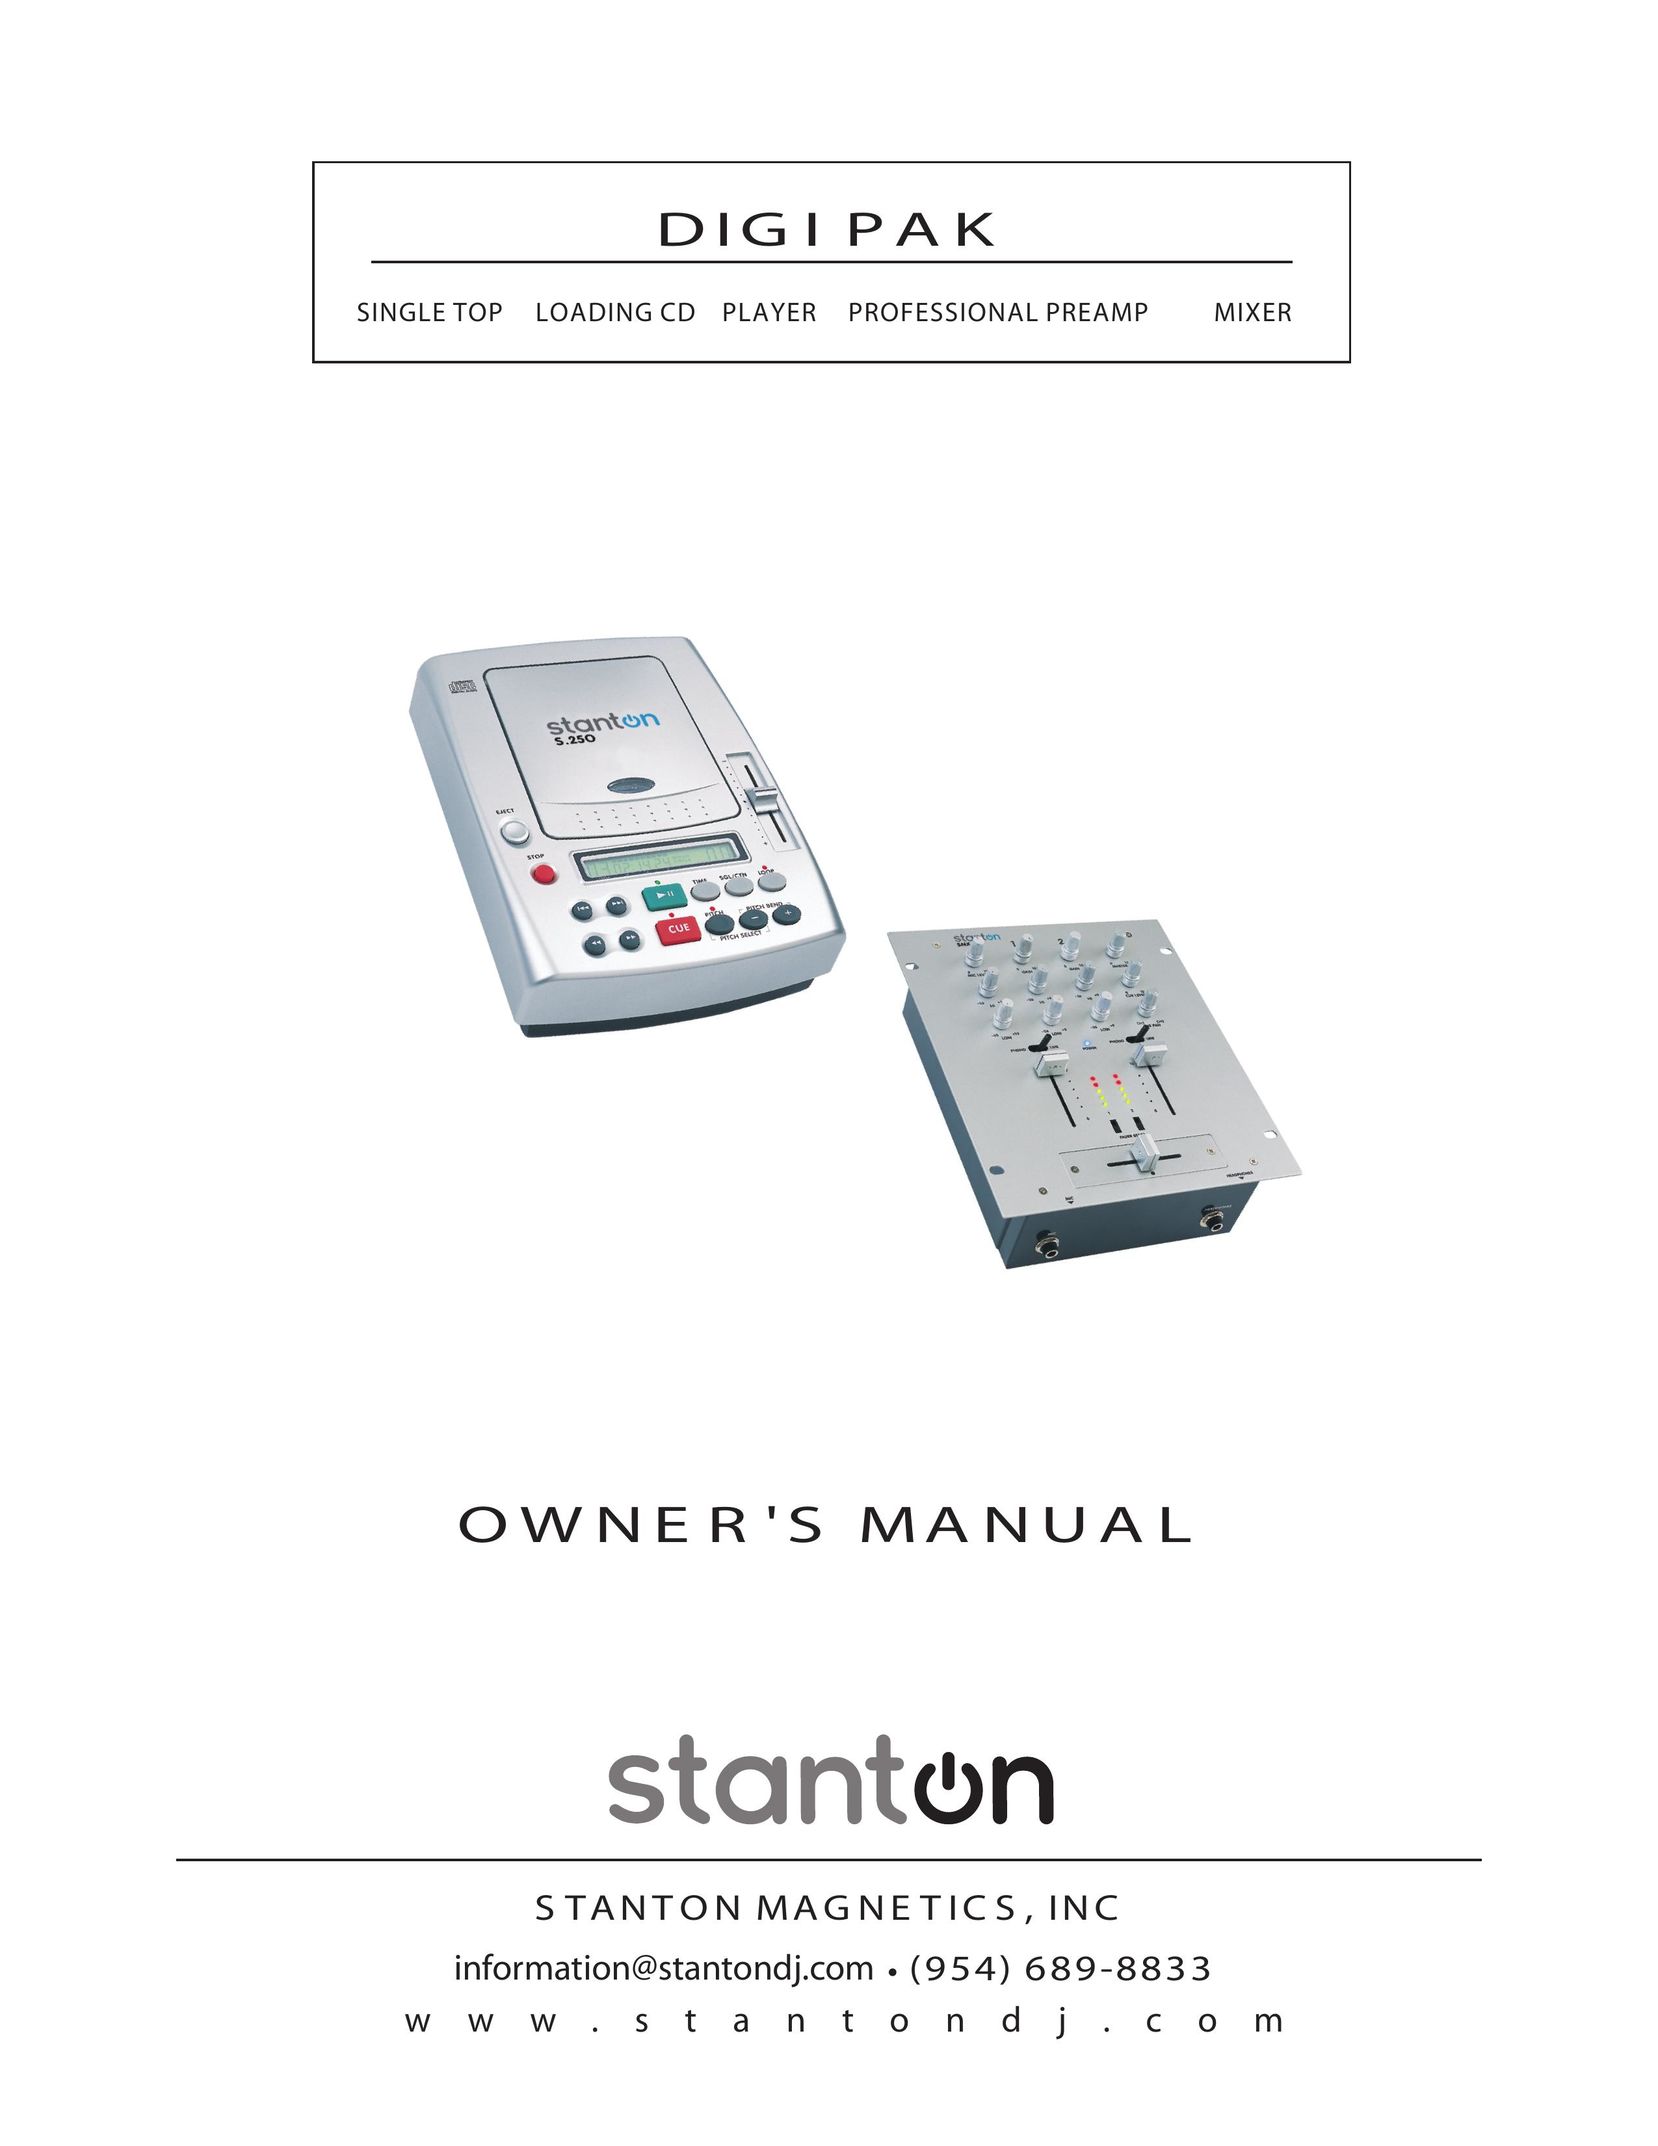 Stanton SINGLE TOP LOADING CD PLAYER PROFESSIONAL PREAMP MIXER CD Player User Manual